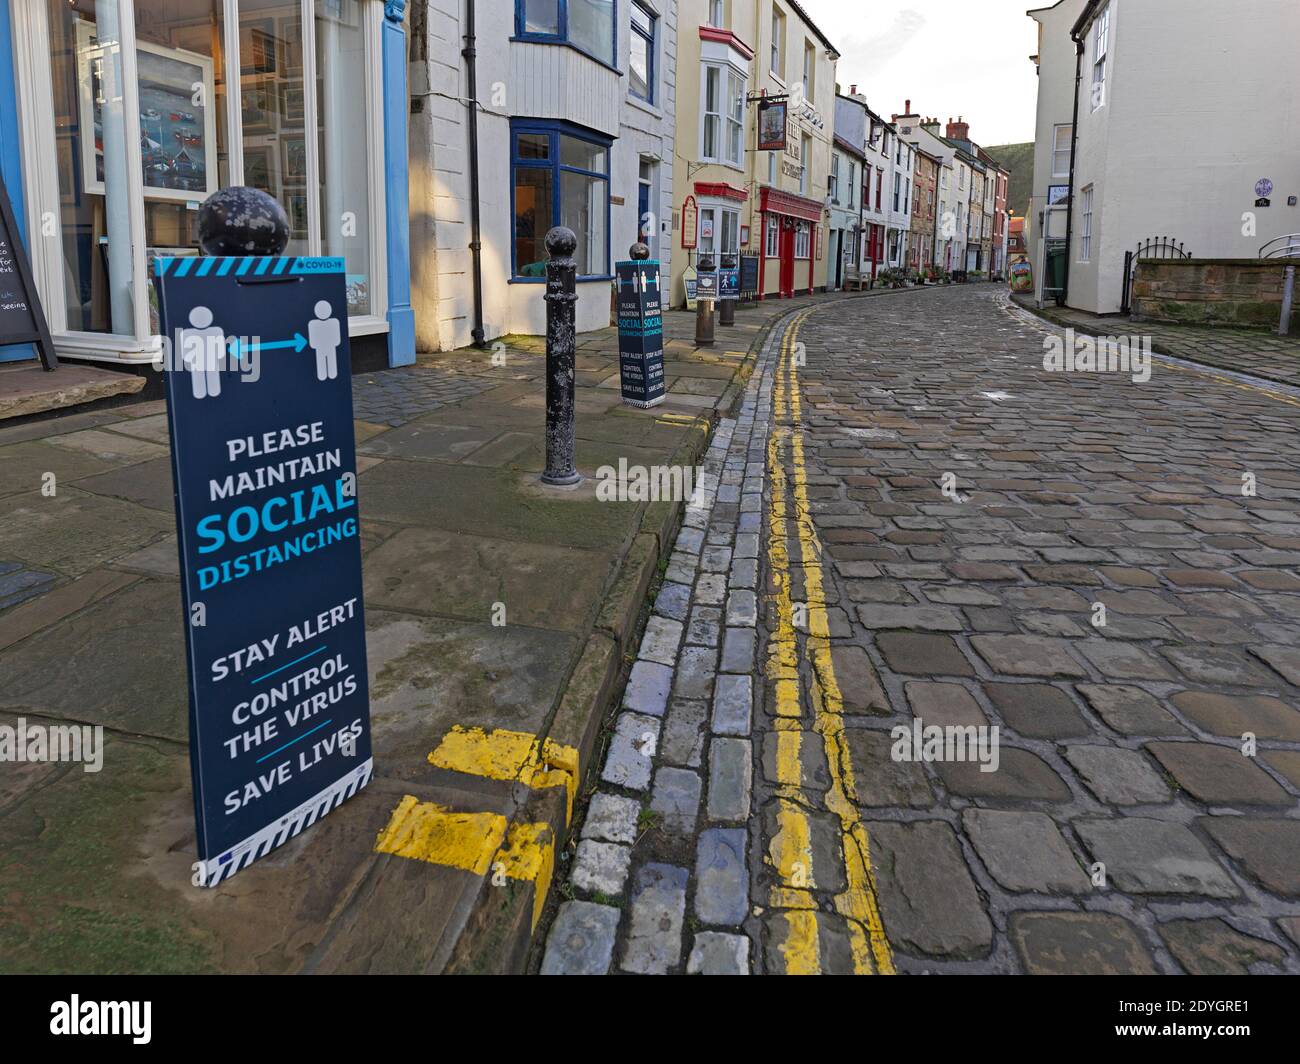 Covid-19 social distancing reminder signs on street bollards in the rural North Yorkshire town of Staithes Stock Photo